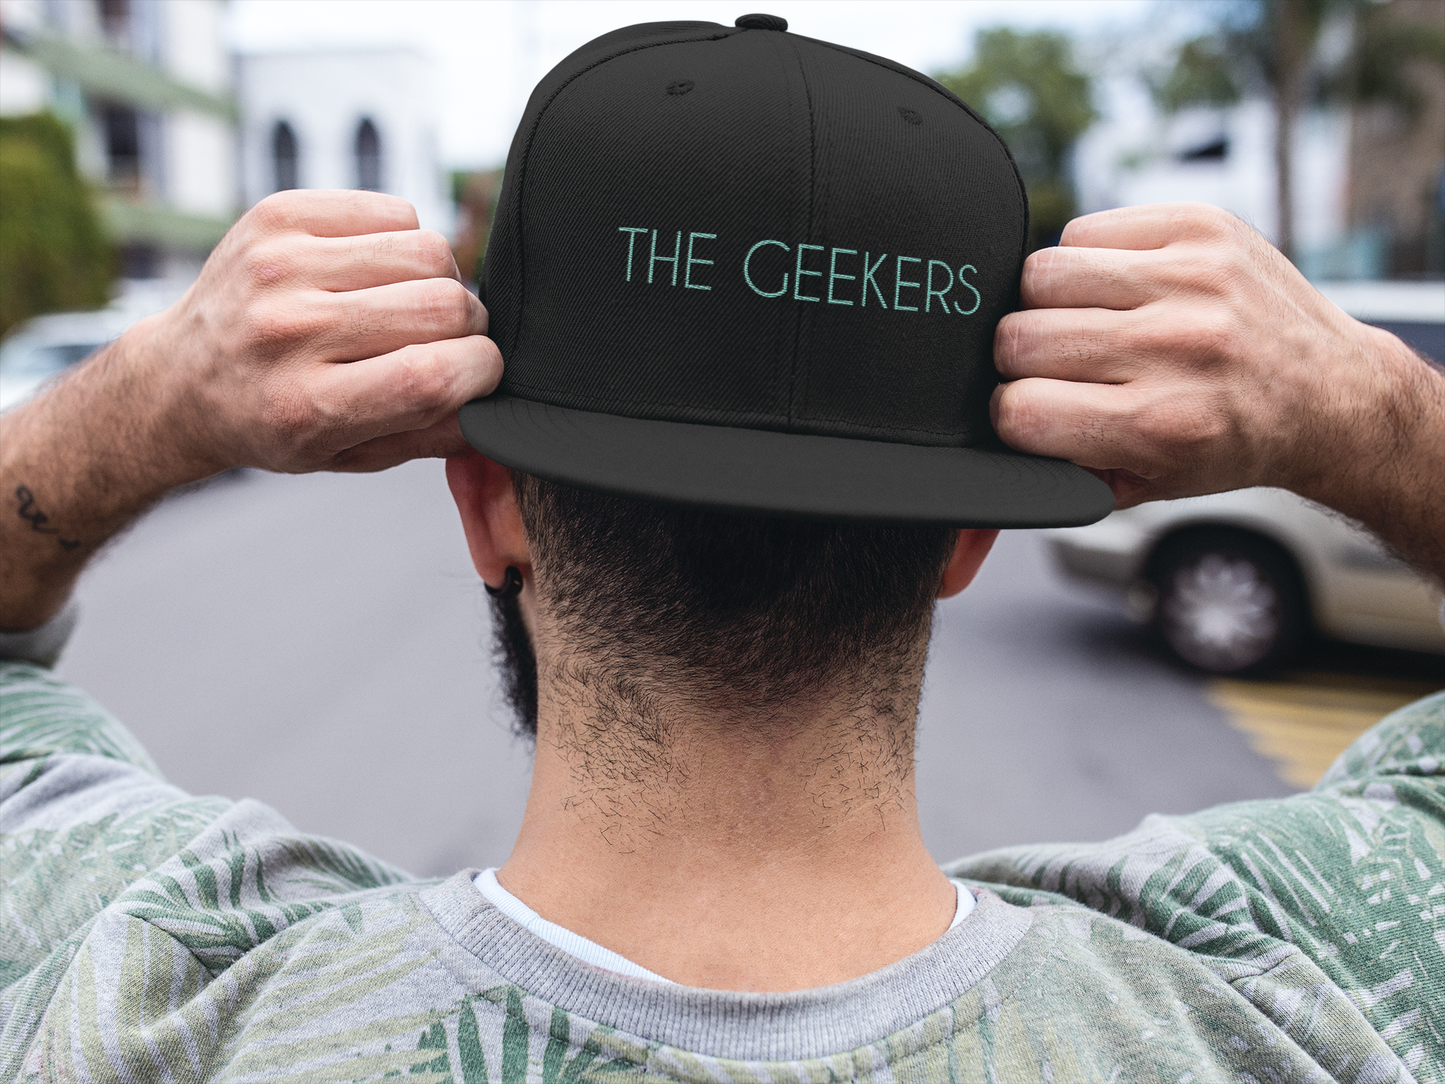 THE GEEKERS SNAPBACK HAT